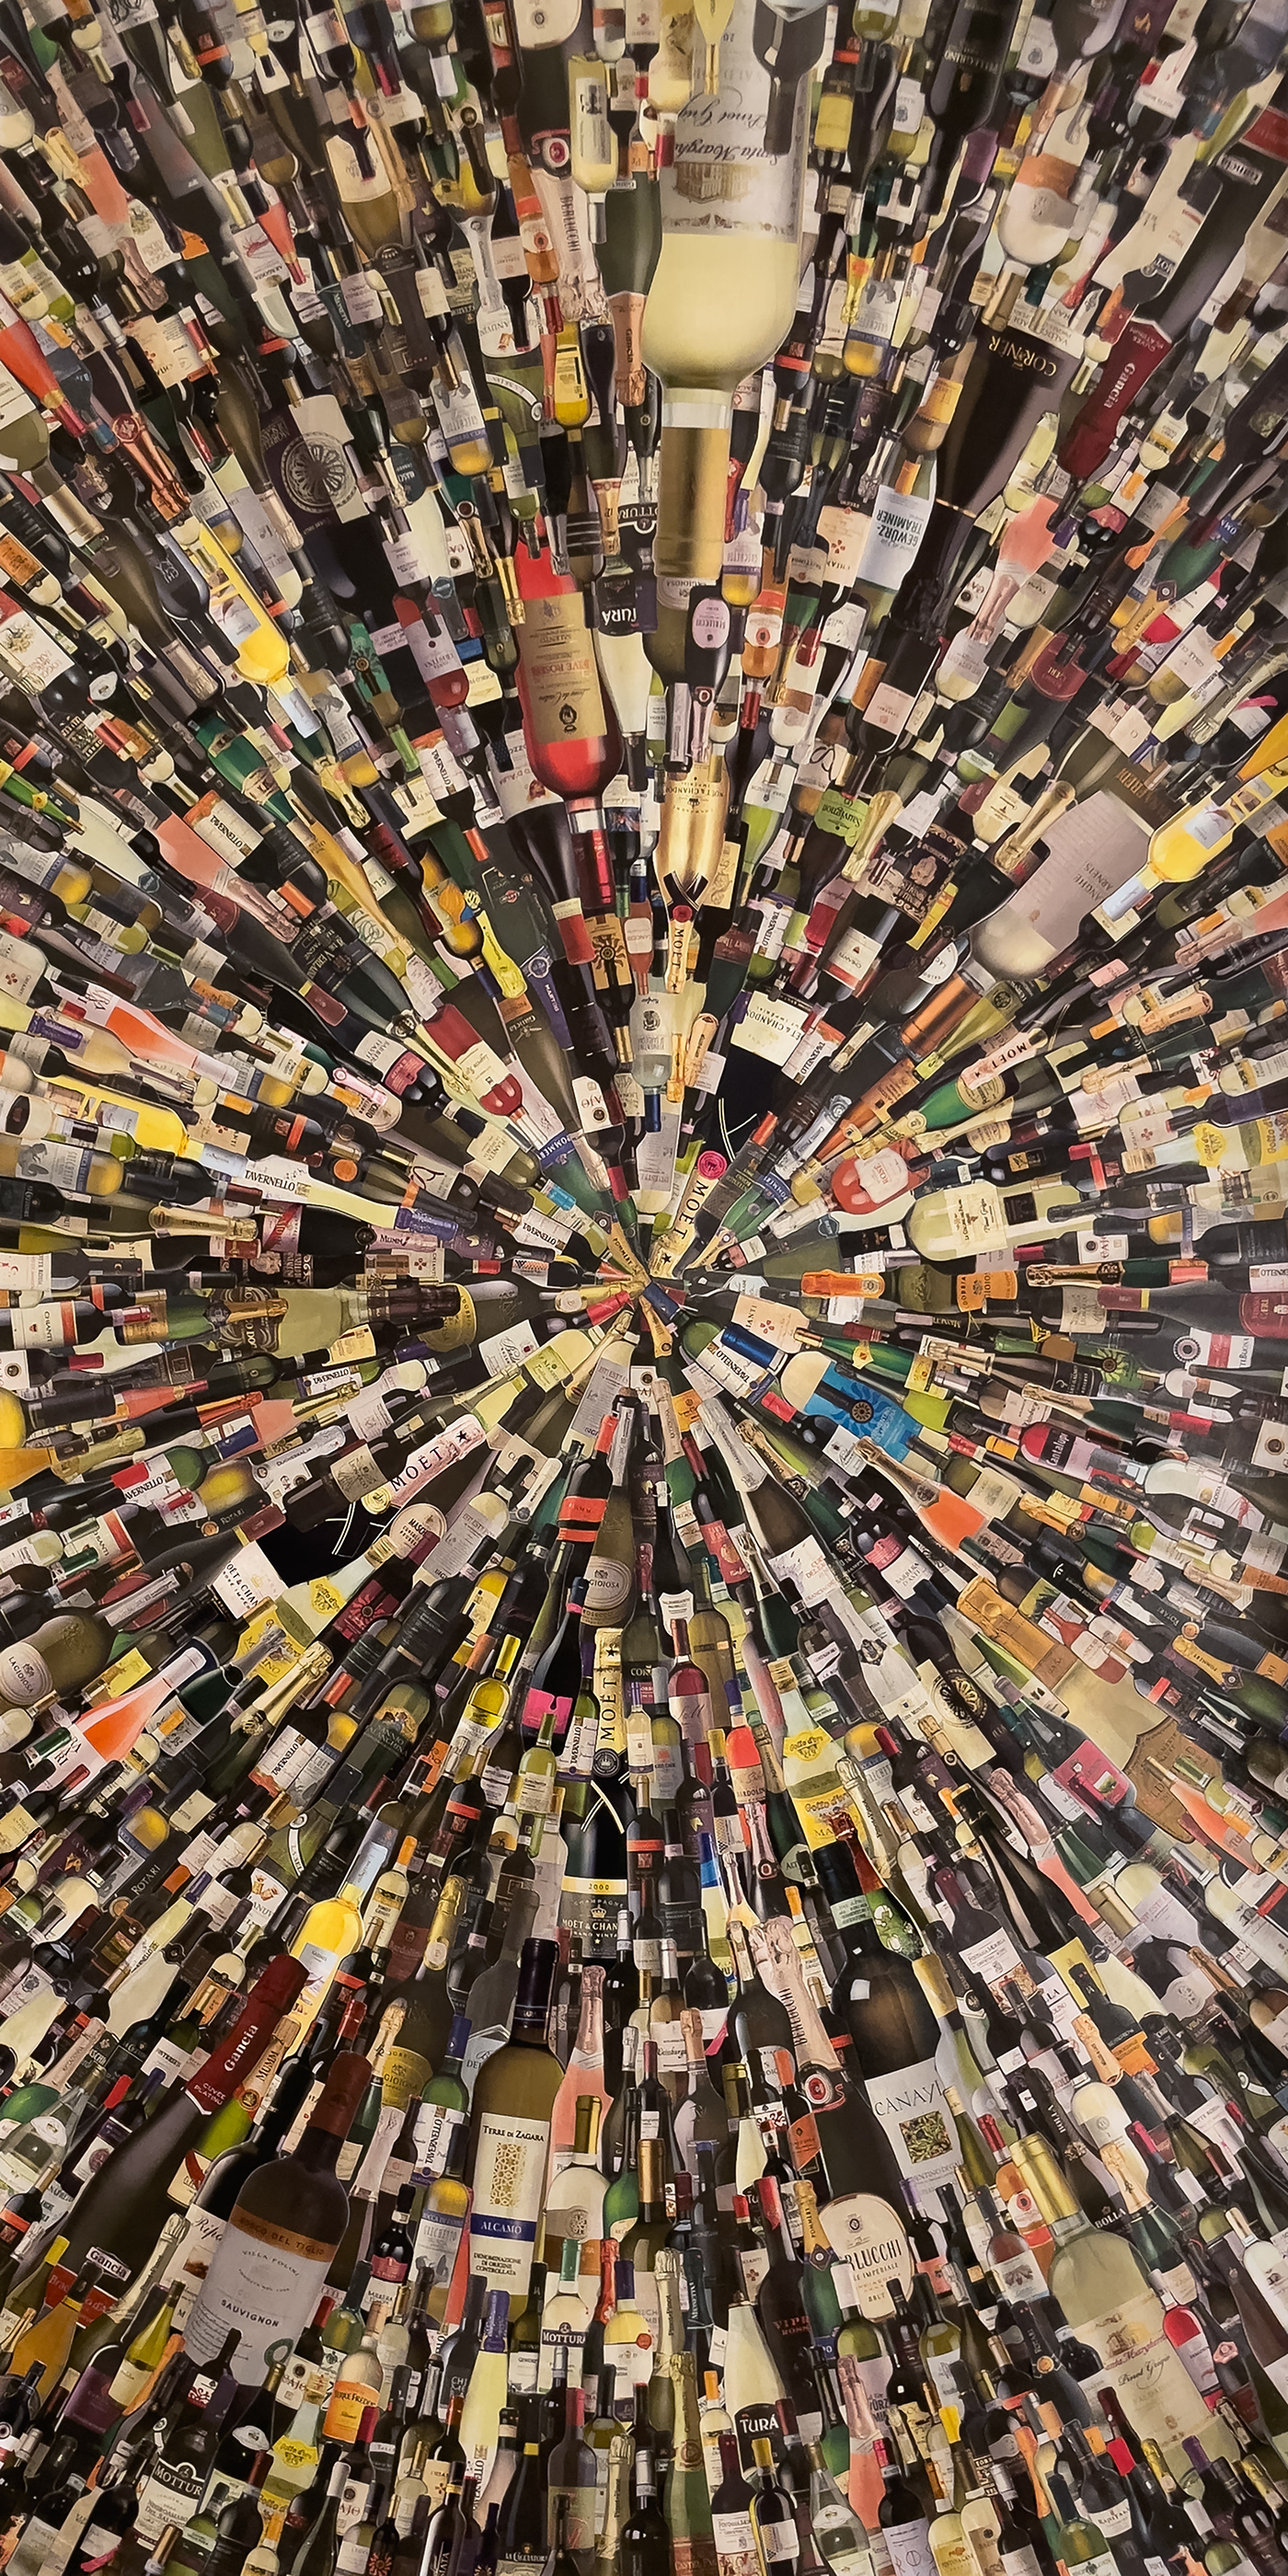 "Vertigo" collage features a swirl made of wine, prosecco and champagne bottles individually cut